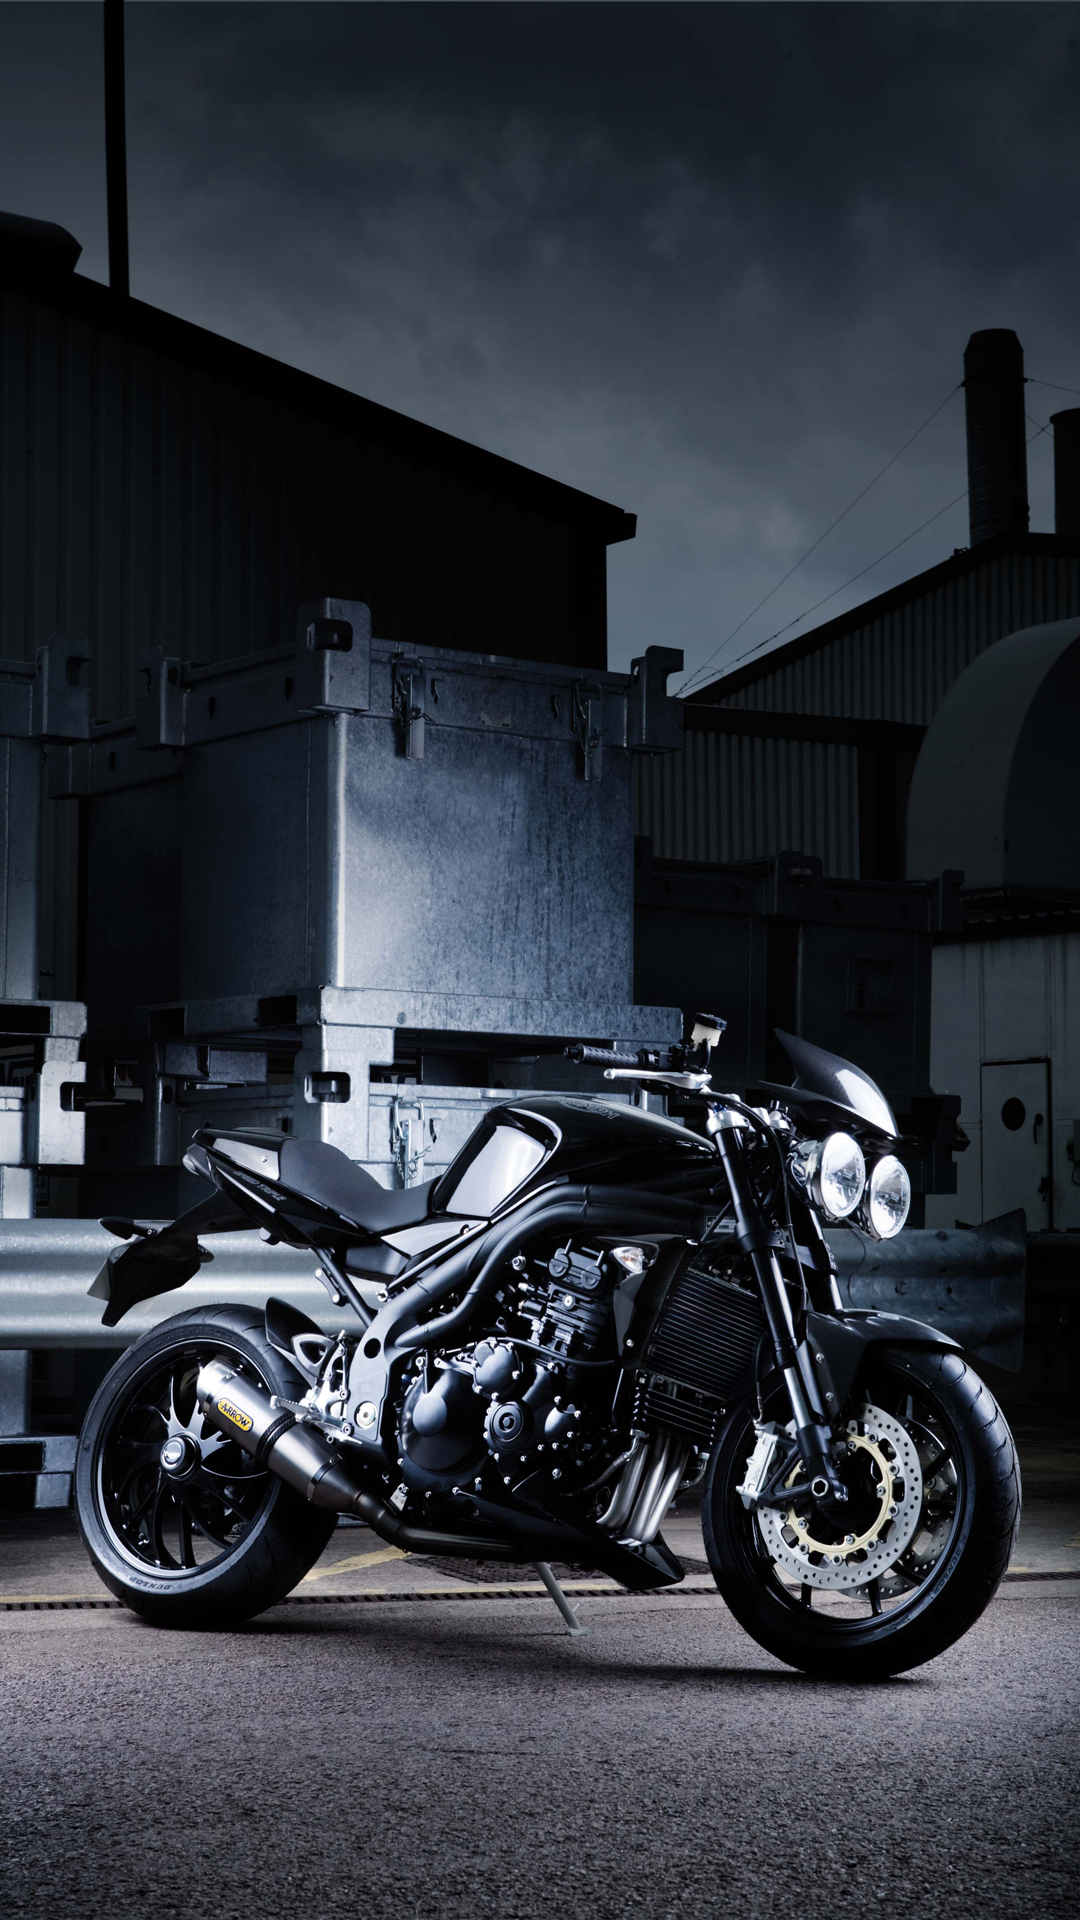 Best Motorcycles hd wallpapers 1080x1920 for htc one